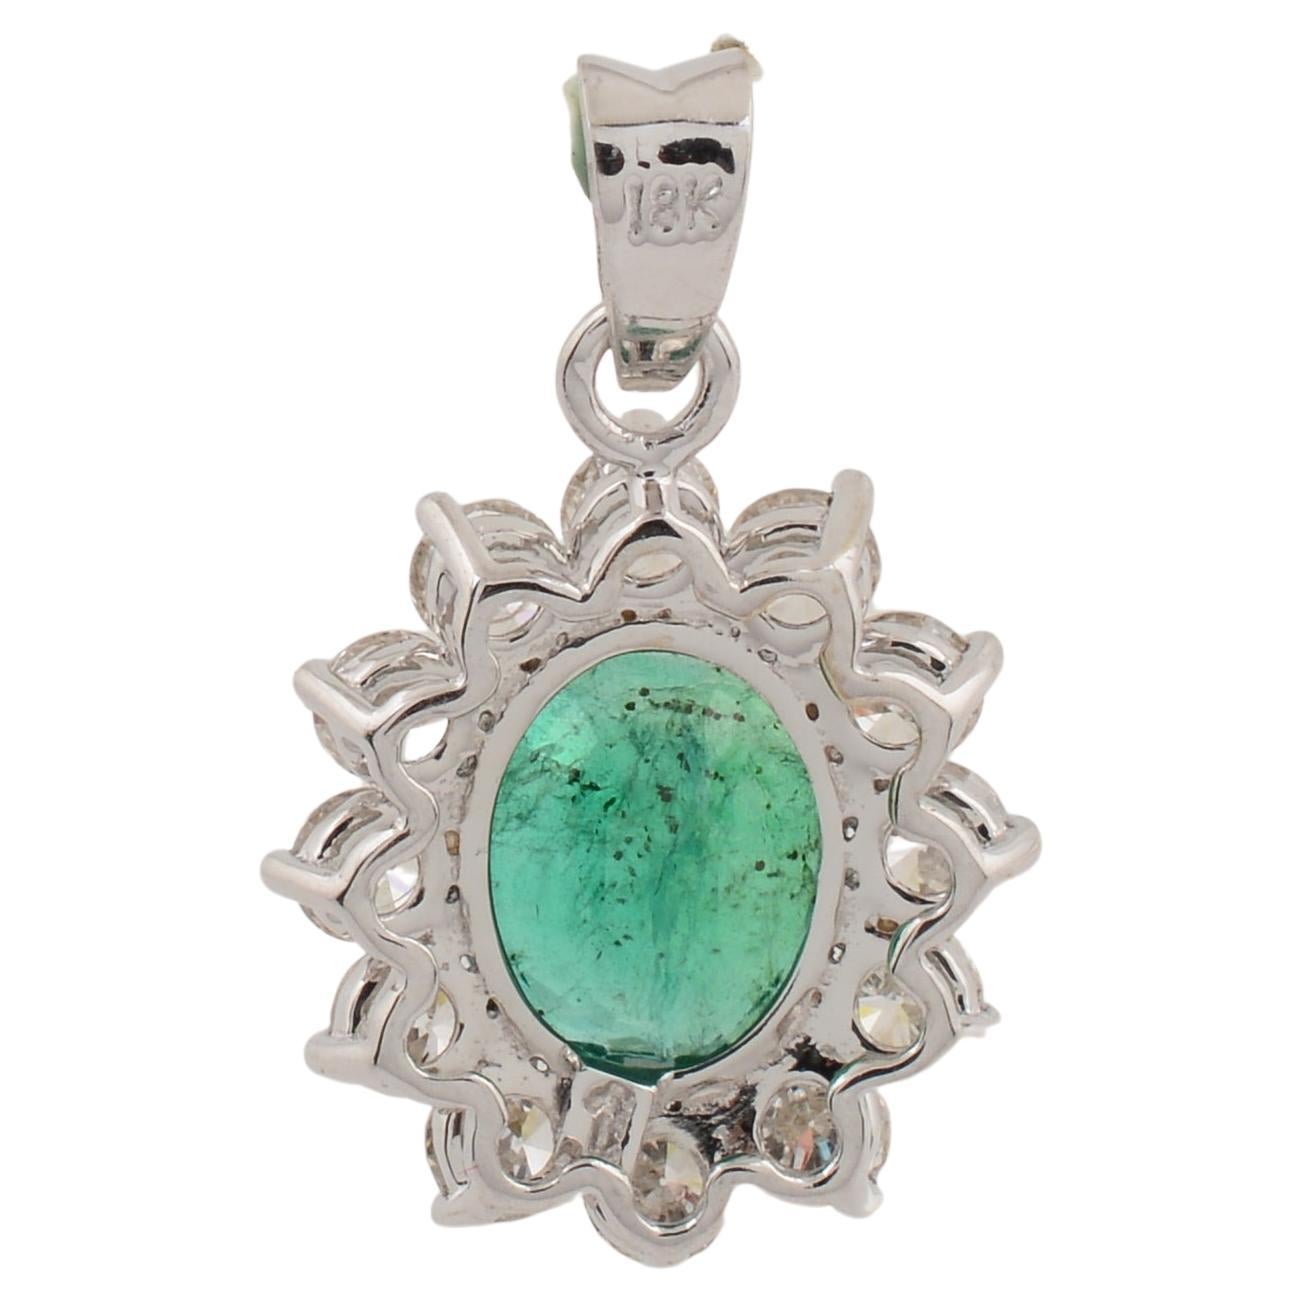 This Oval Natural Emerald Gemstone Charm Pendant is a versatile accessory suitable for various occasions. Whether worn for a special event, a romantic evening, or as an everyday statement piece, it effortlessly exudes elegance and sophistication. It